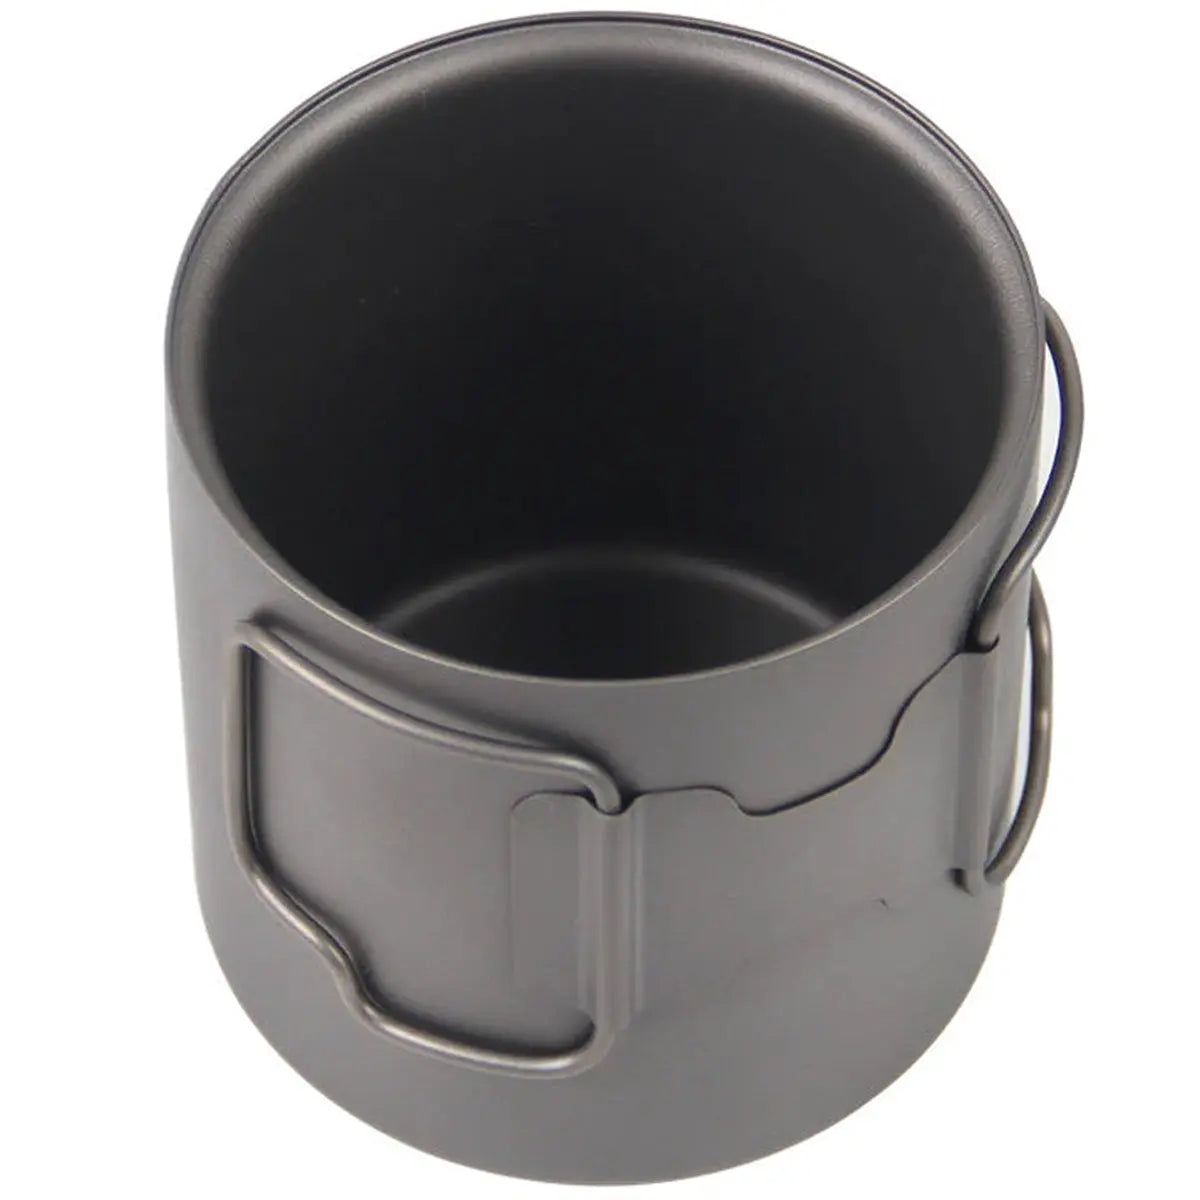 TOAKS Titanium Lightweight 370ml Double Wall Cup CUP-370-DW - Outdoor Camping Toaks